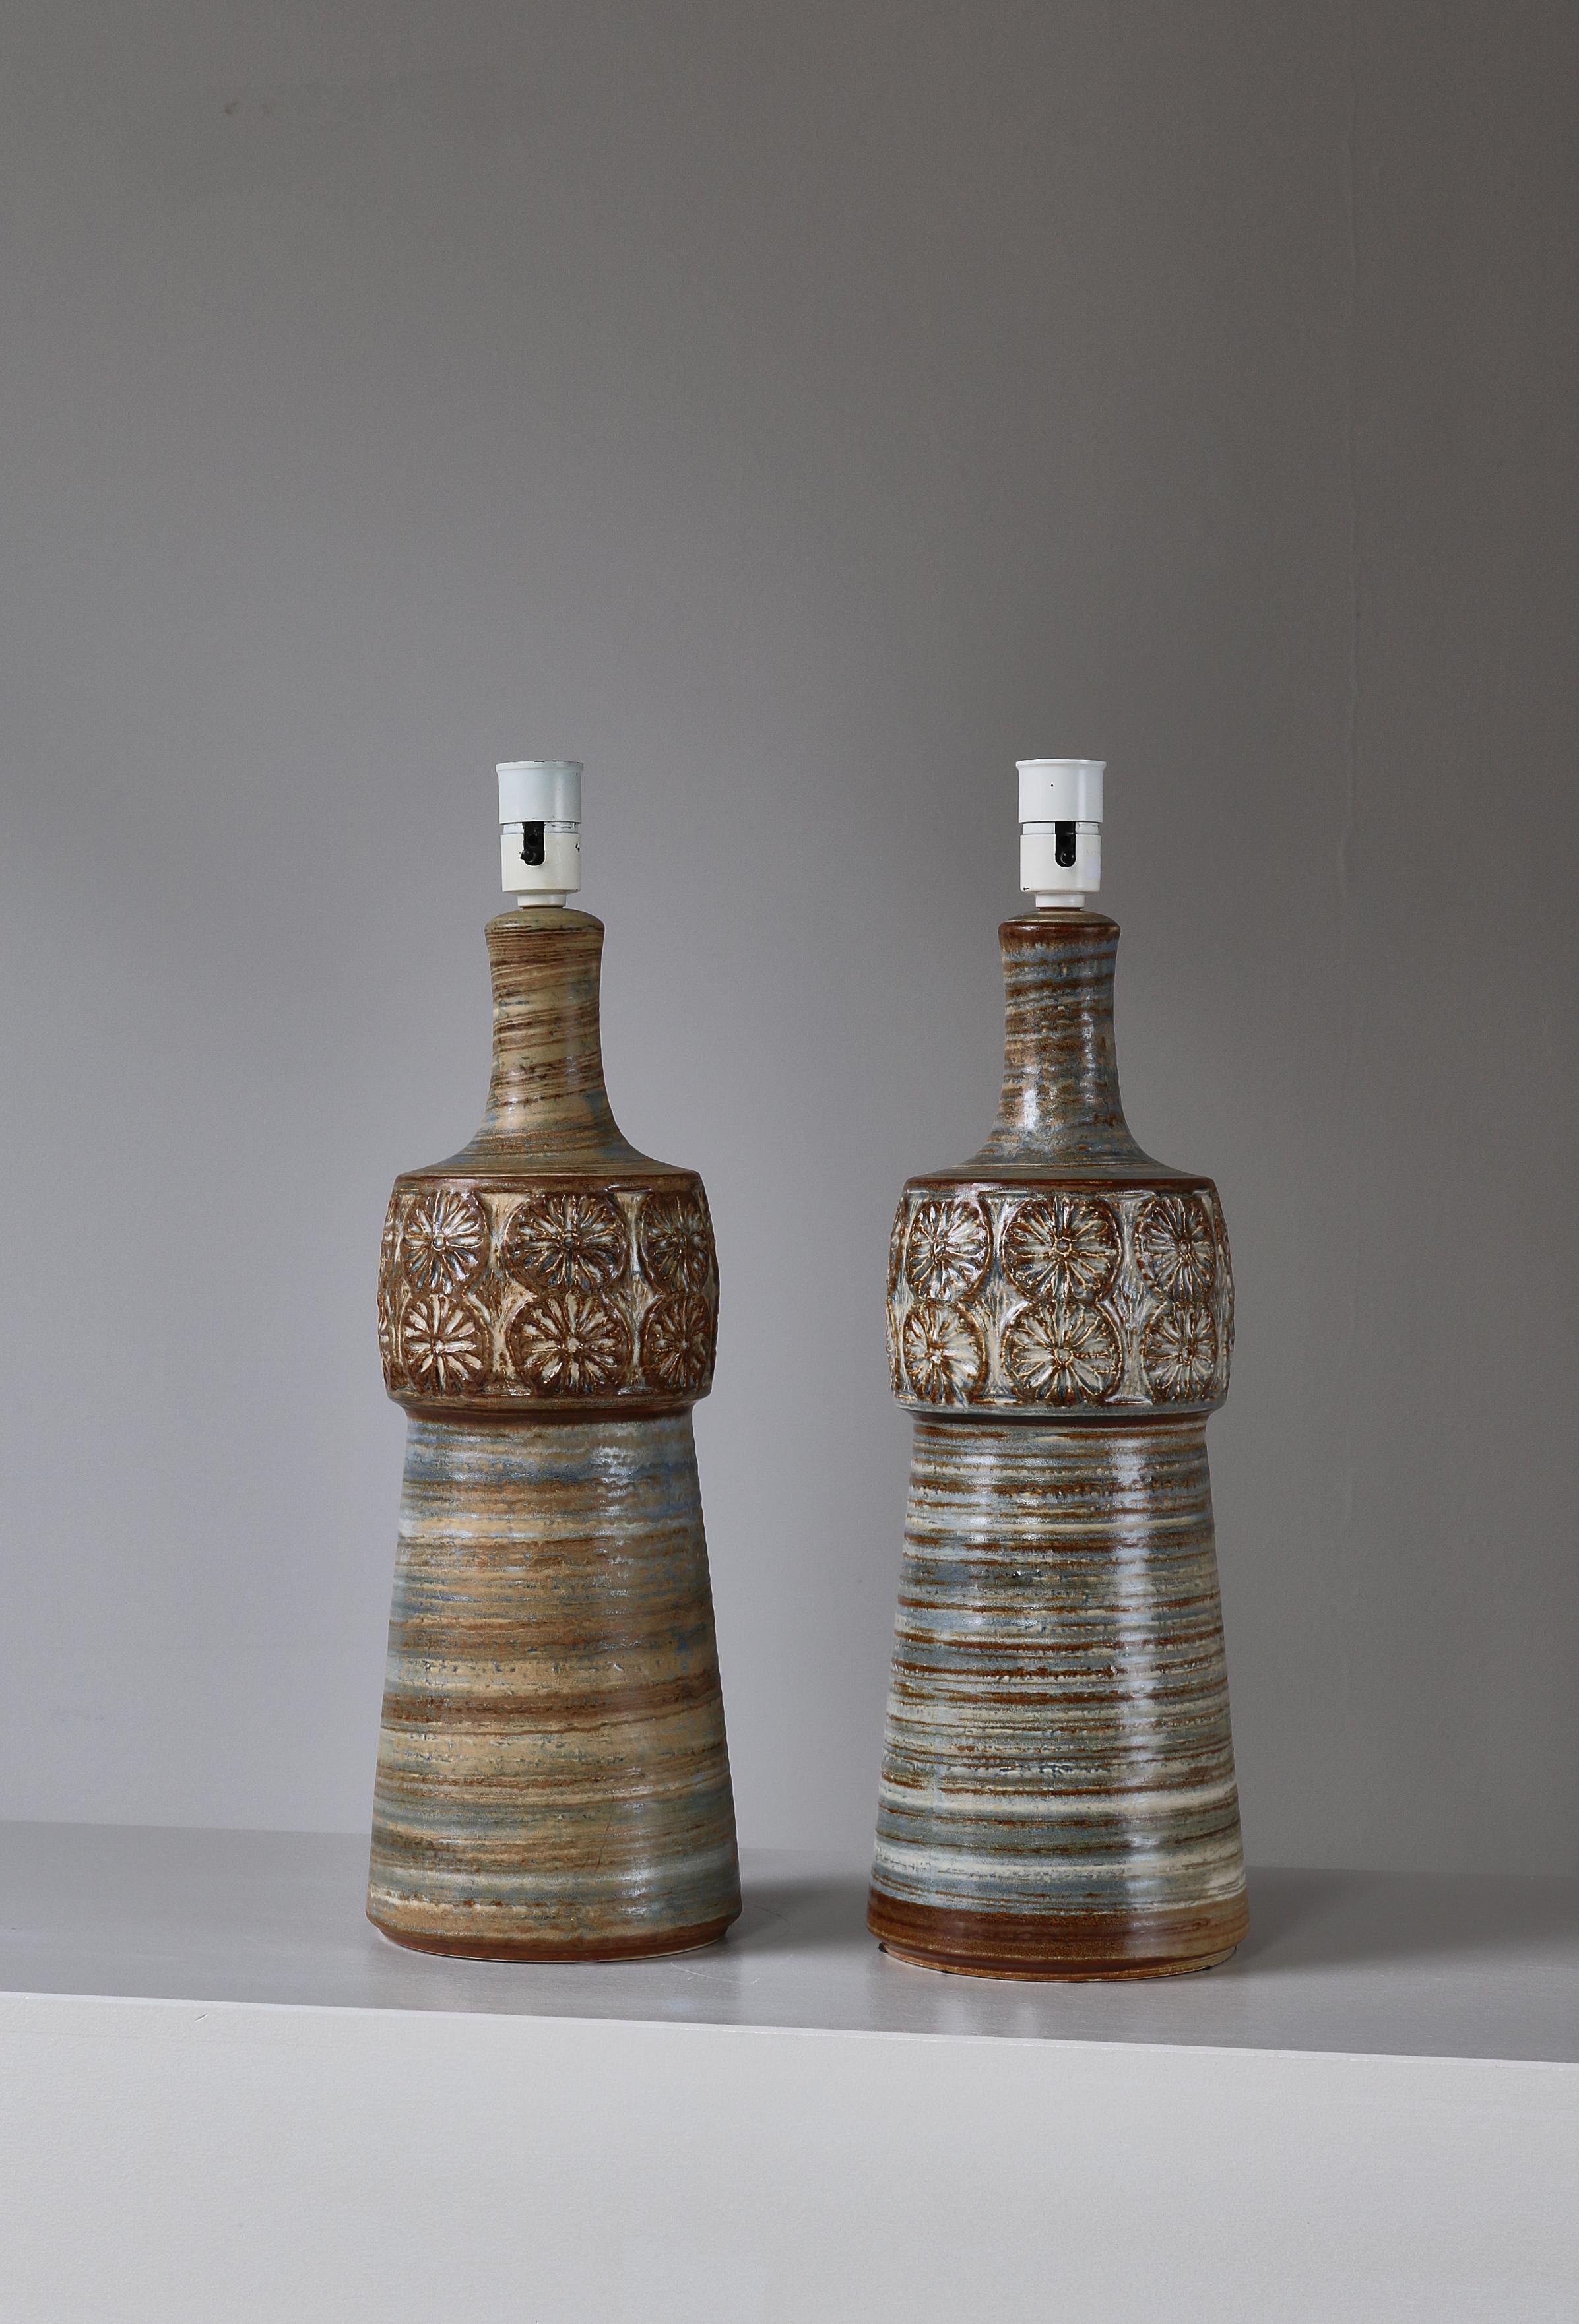 Pair of Unique Danish Modern Stoneware Table Lamps by Søholm, Denmark, 1960s For Sale 5